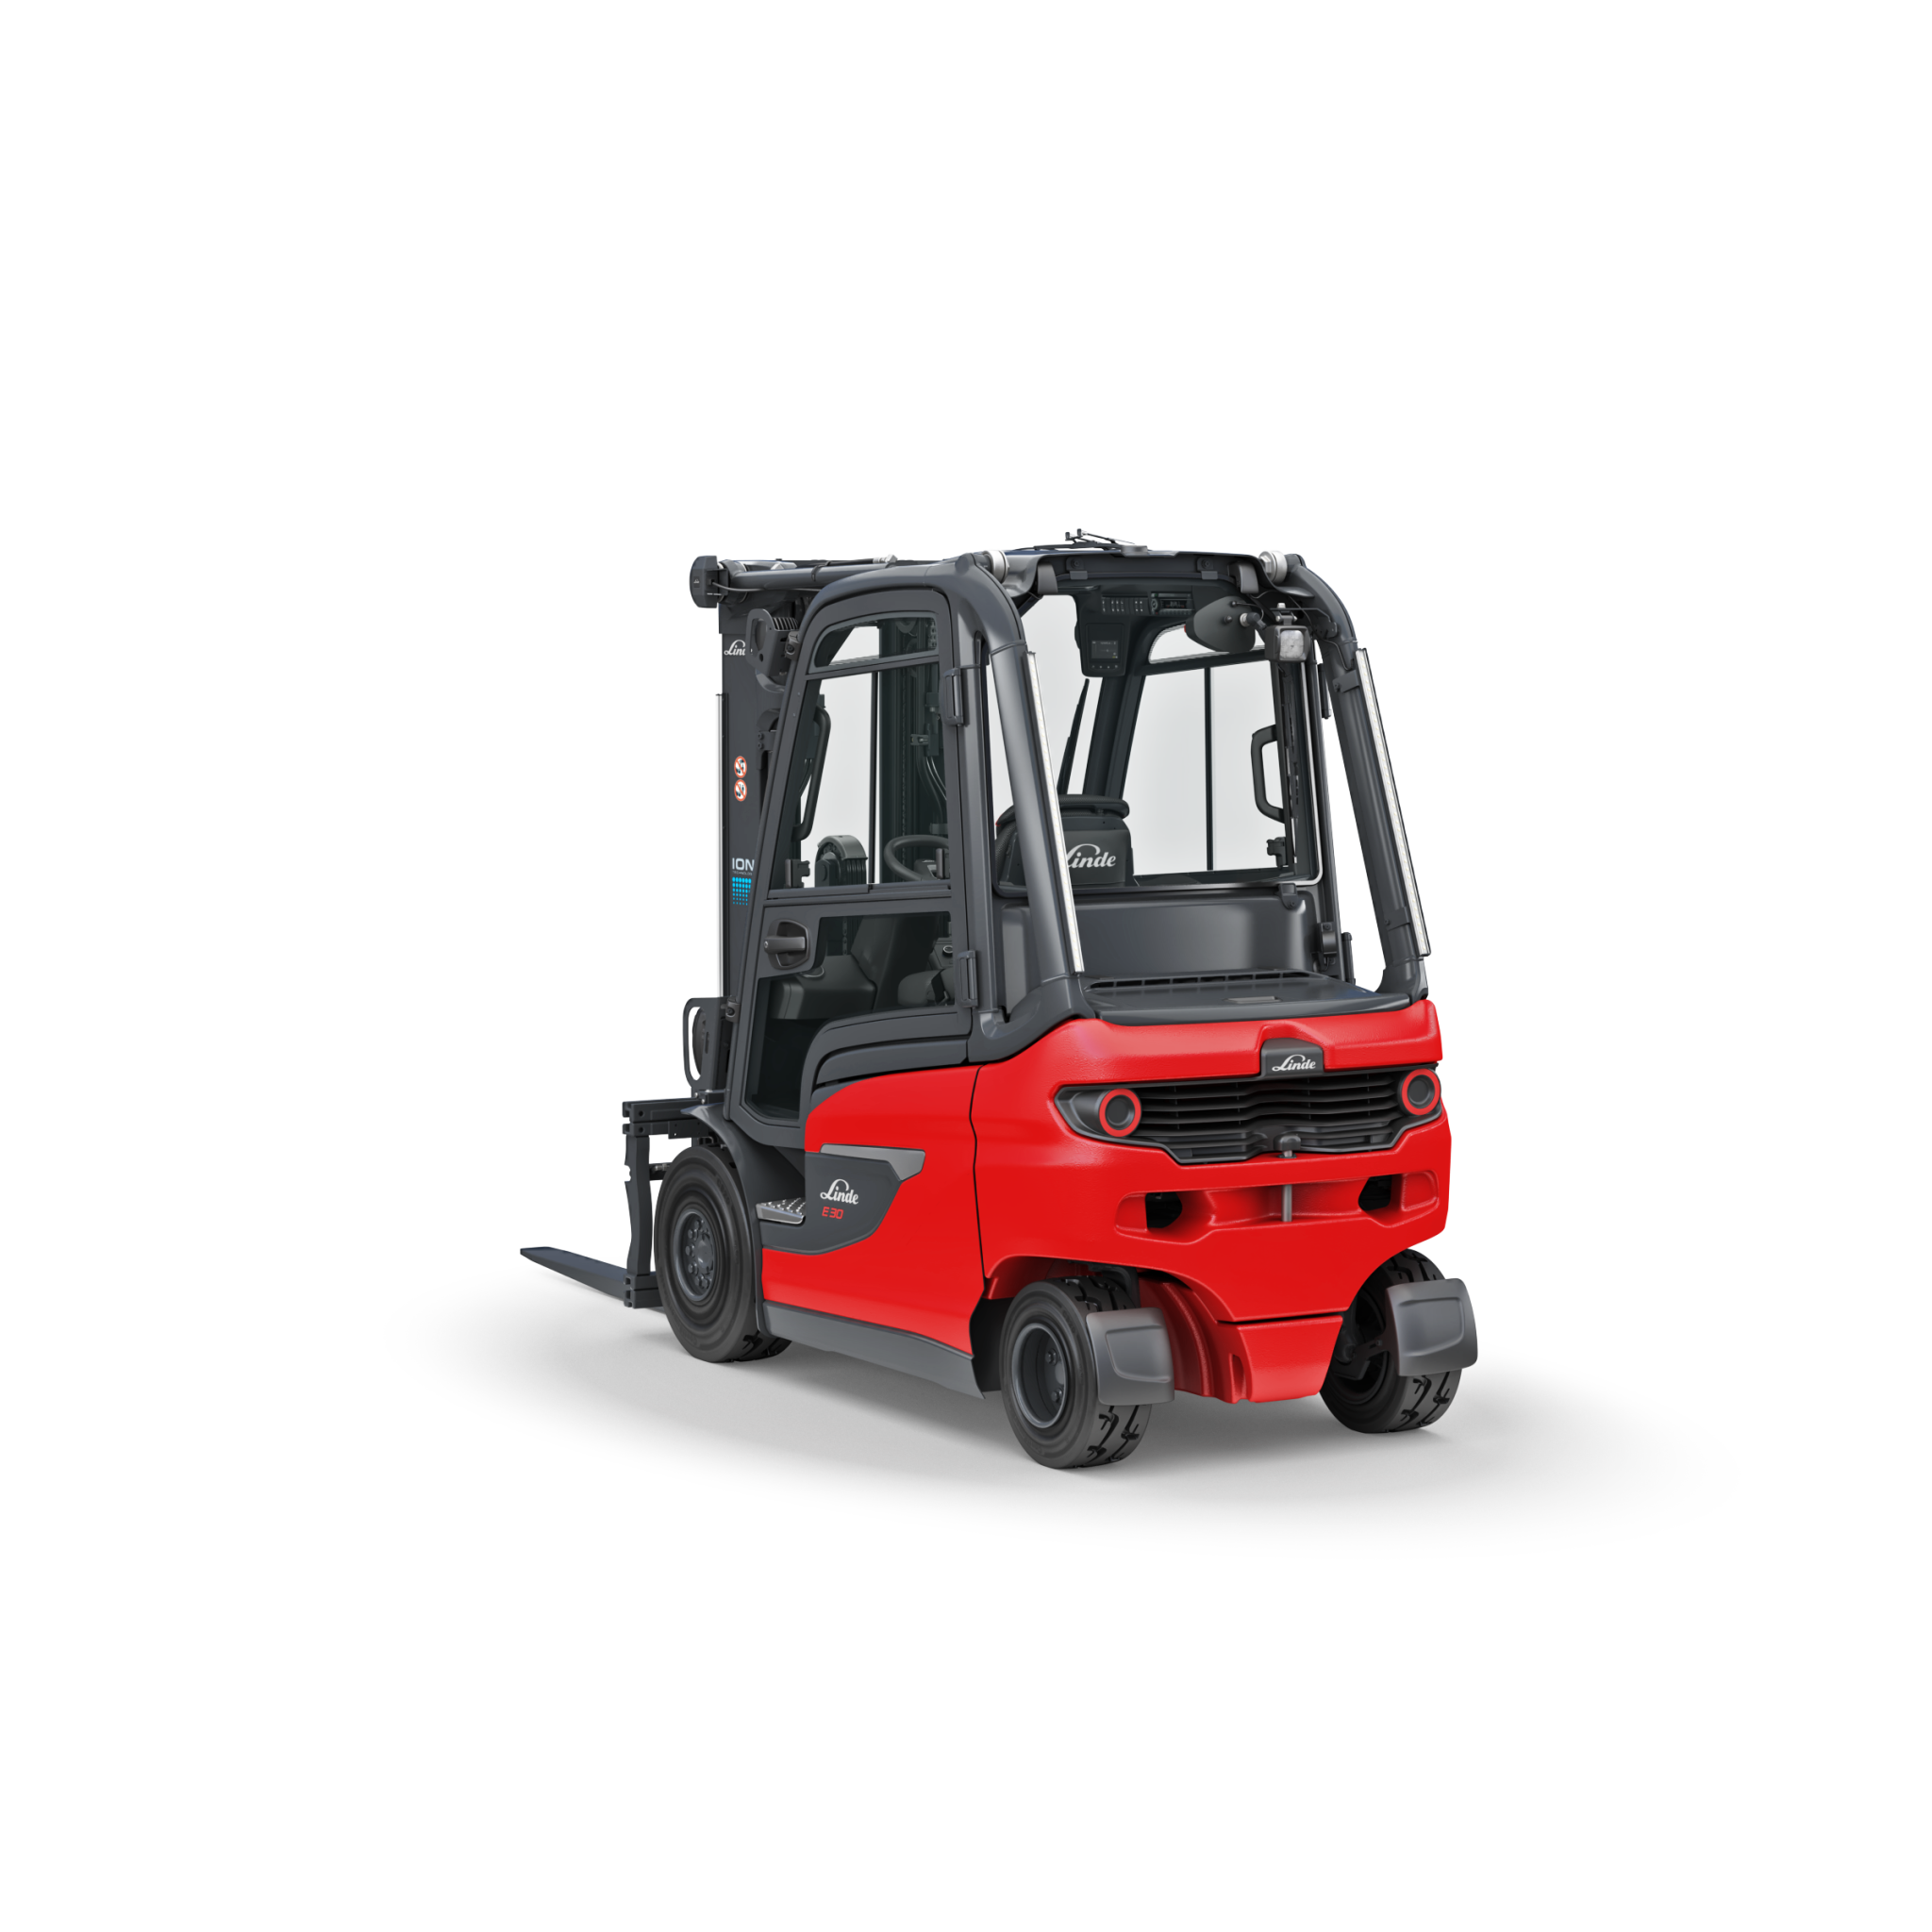 Series 1252 E - Advanced Material Handling Systems